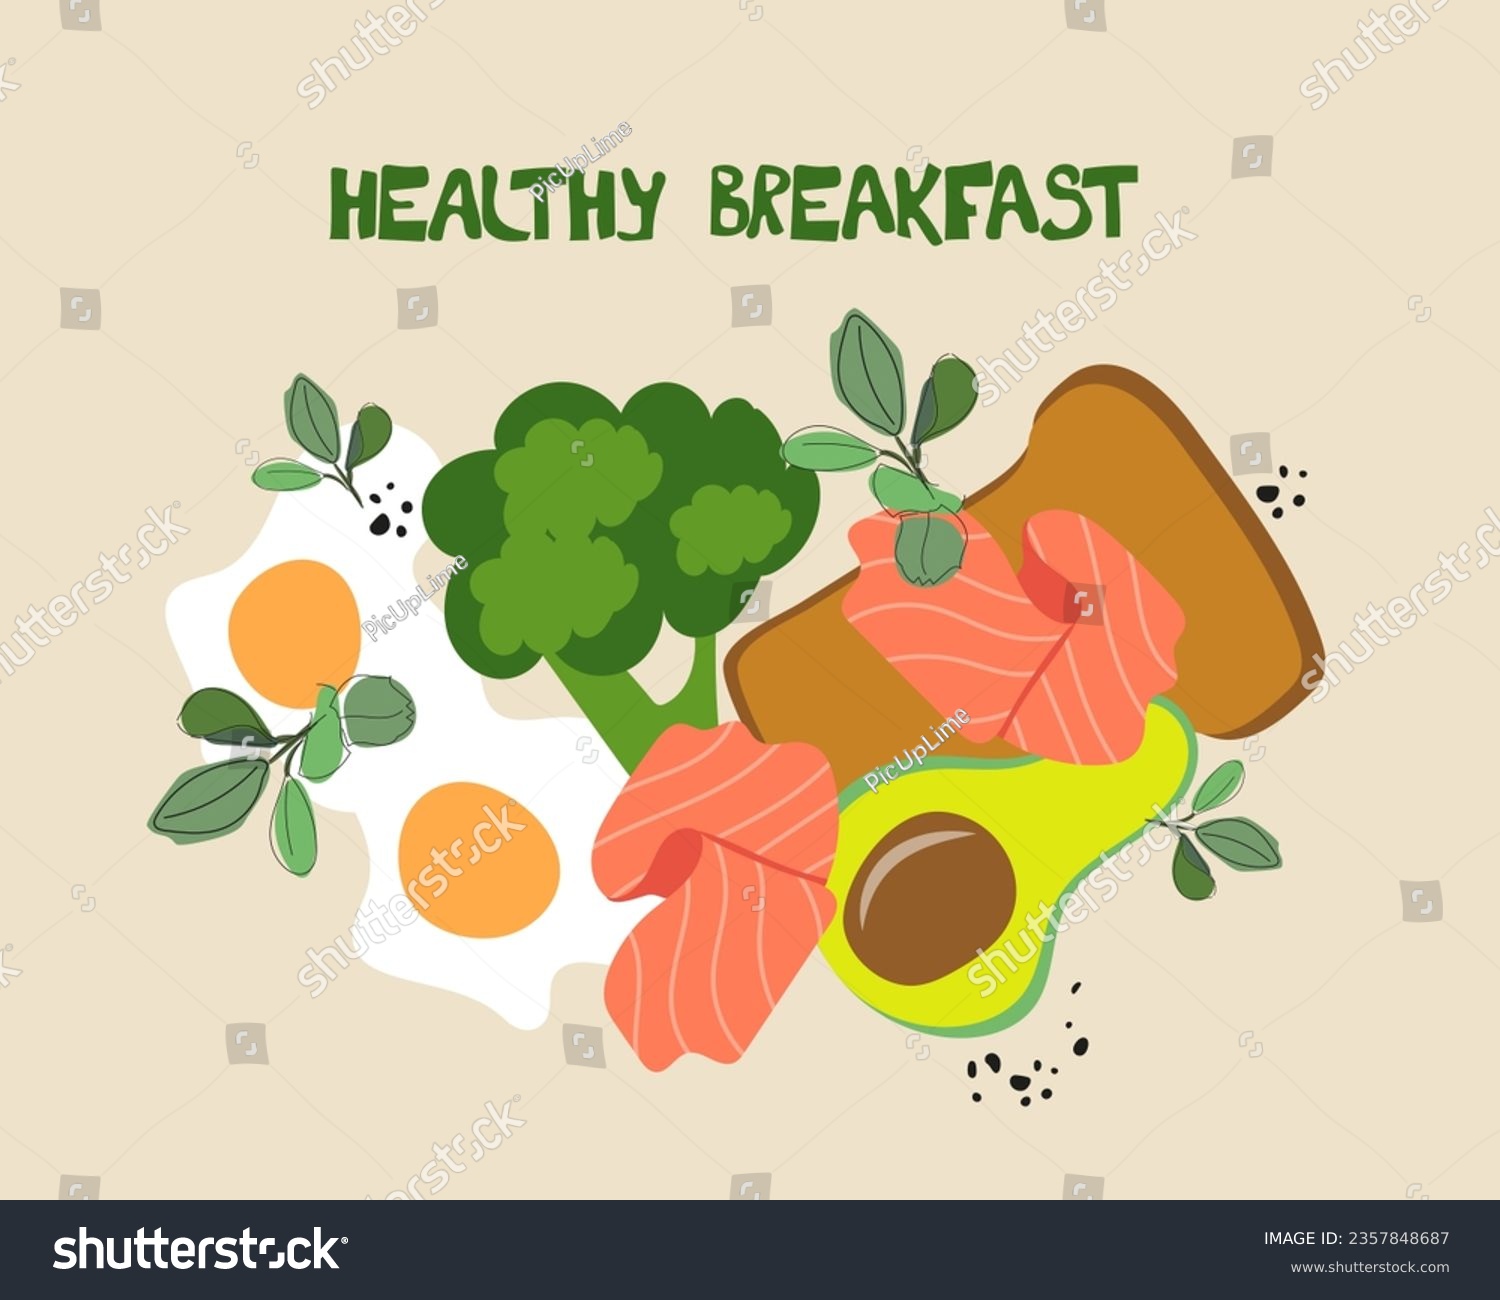 SVG of Fried eggs, broccoli, avocado, toast, slices of salmon. Food for Breakfast. Products for a healthy Breakfast. Hand drawn vector for poster, banner, print design svg